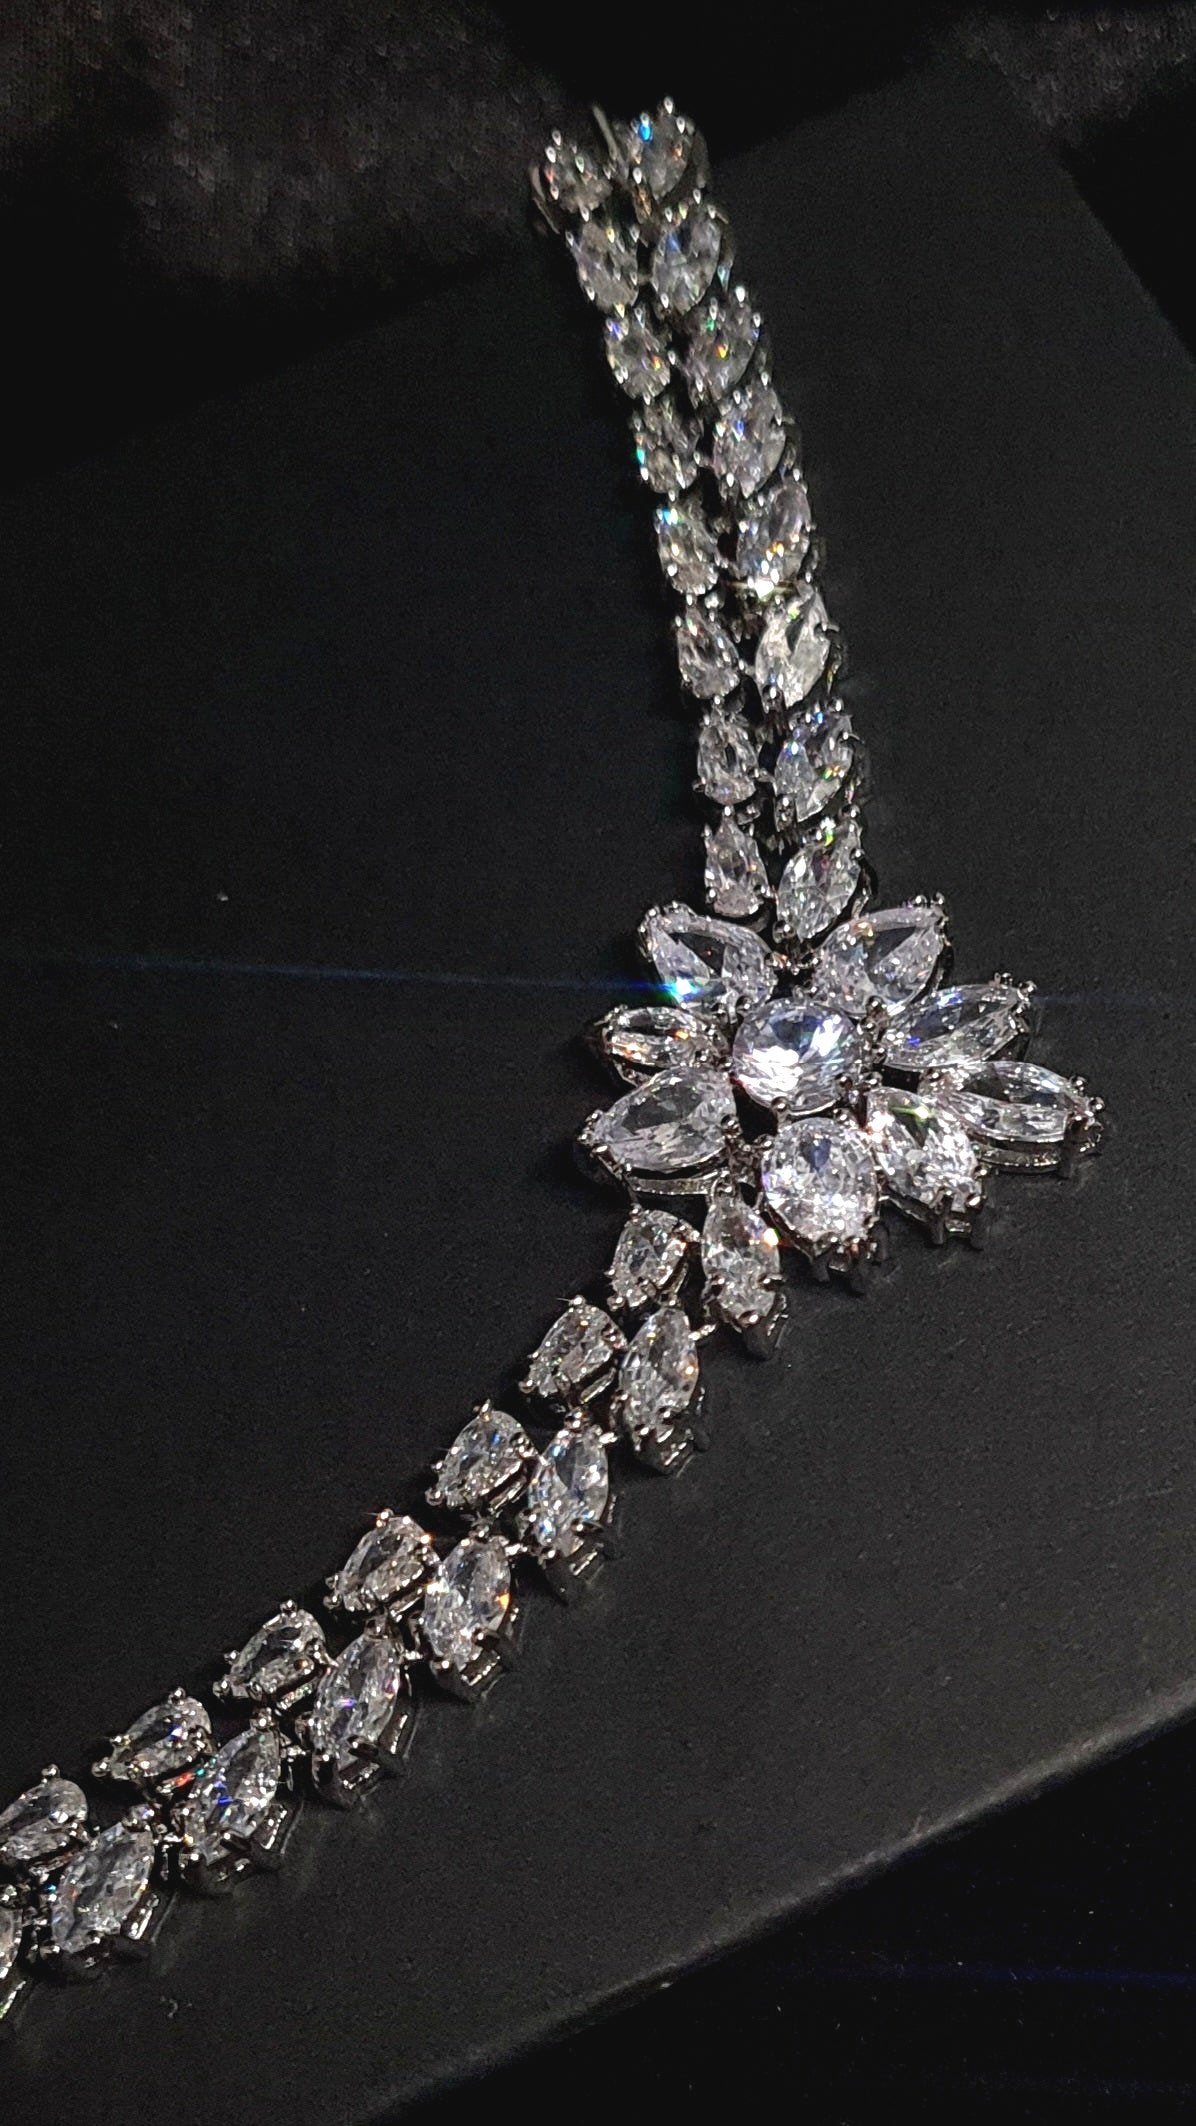 A close-up of a necklace on a black background. The necklace is made of silver and has diamonds in a variety of shapes and sizes. The diamonds are the main focus of the image and they sparkle in the light.